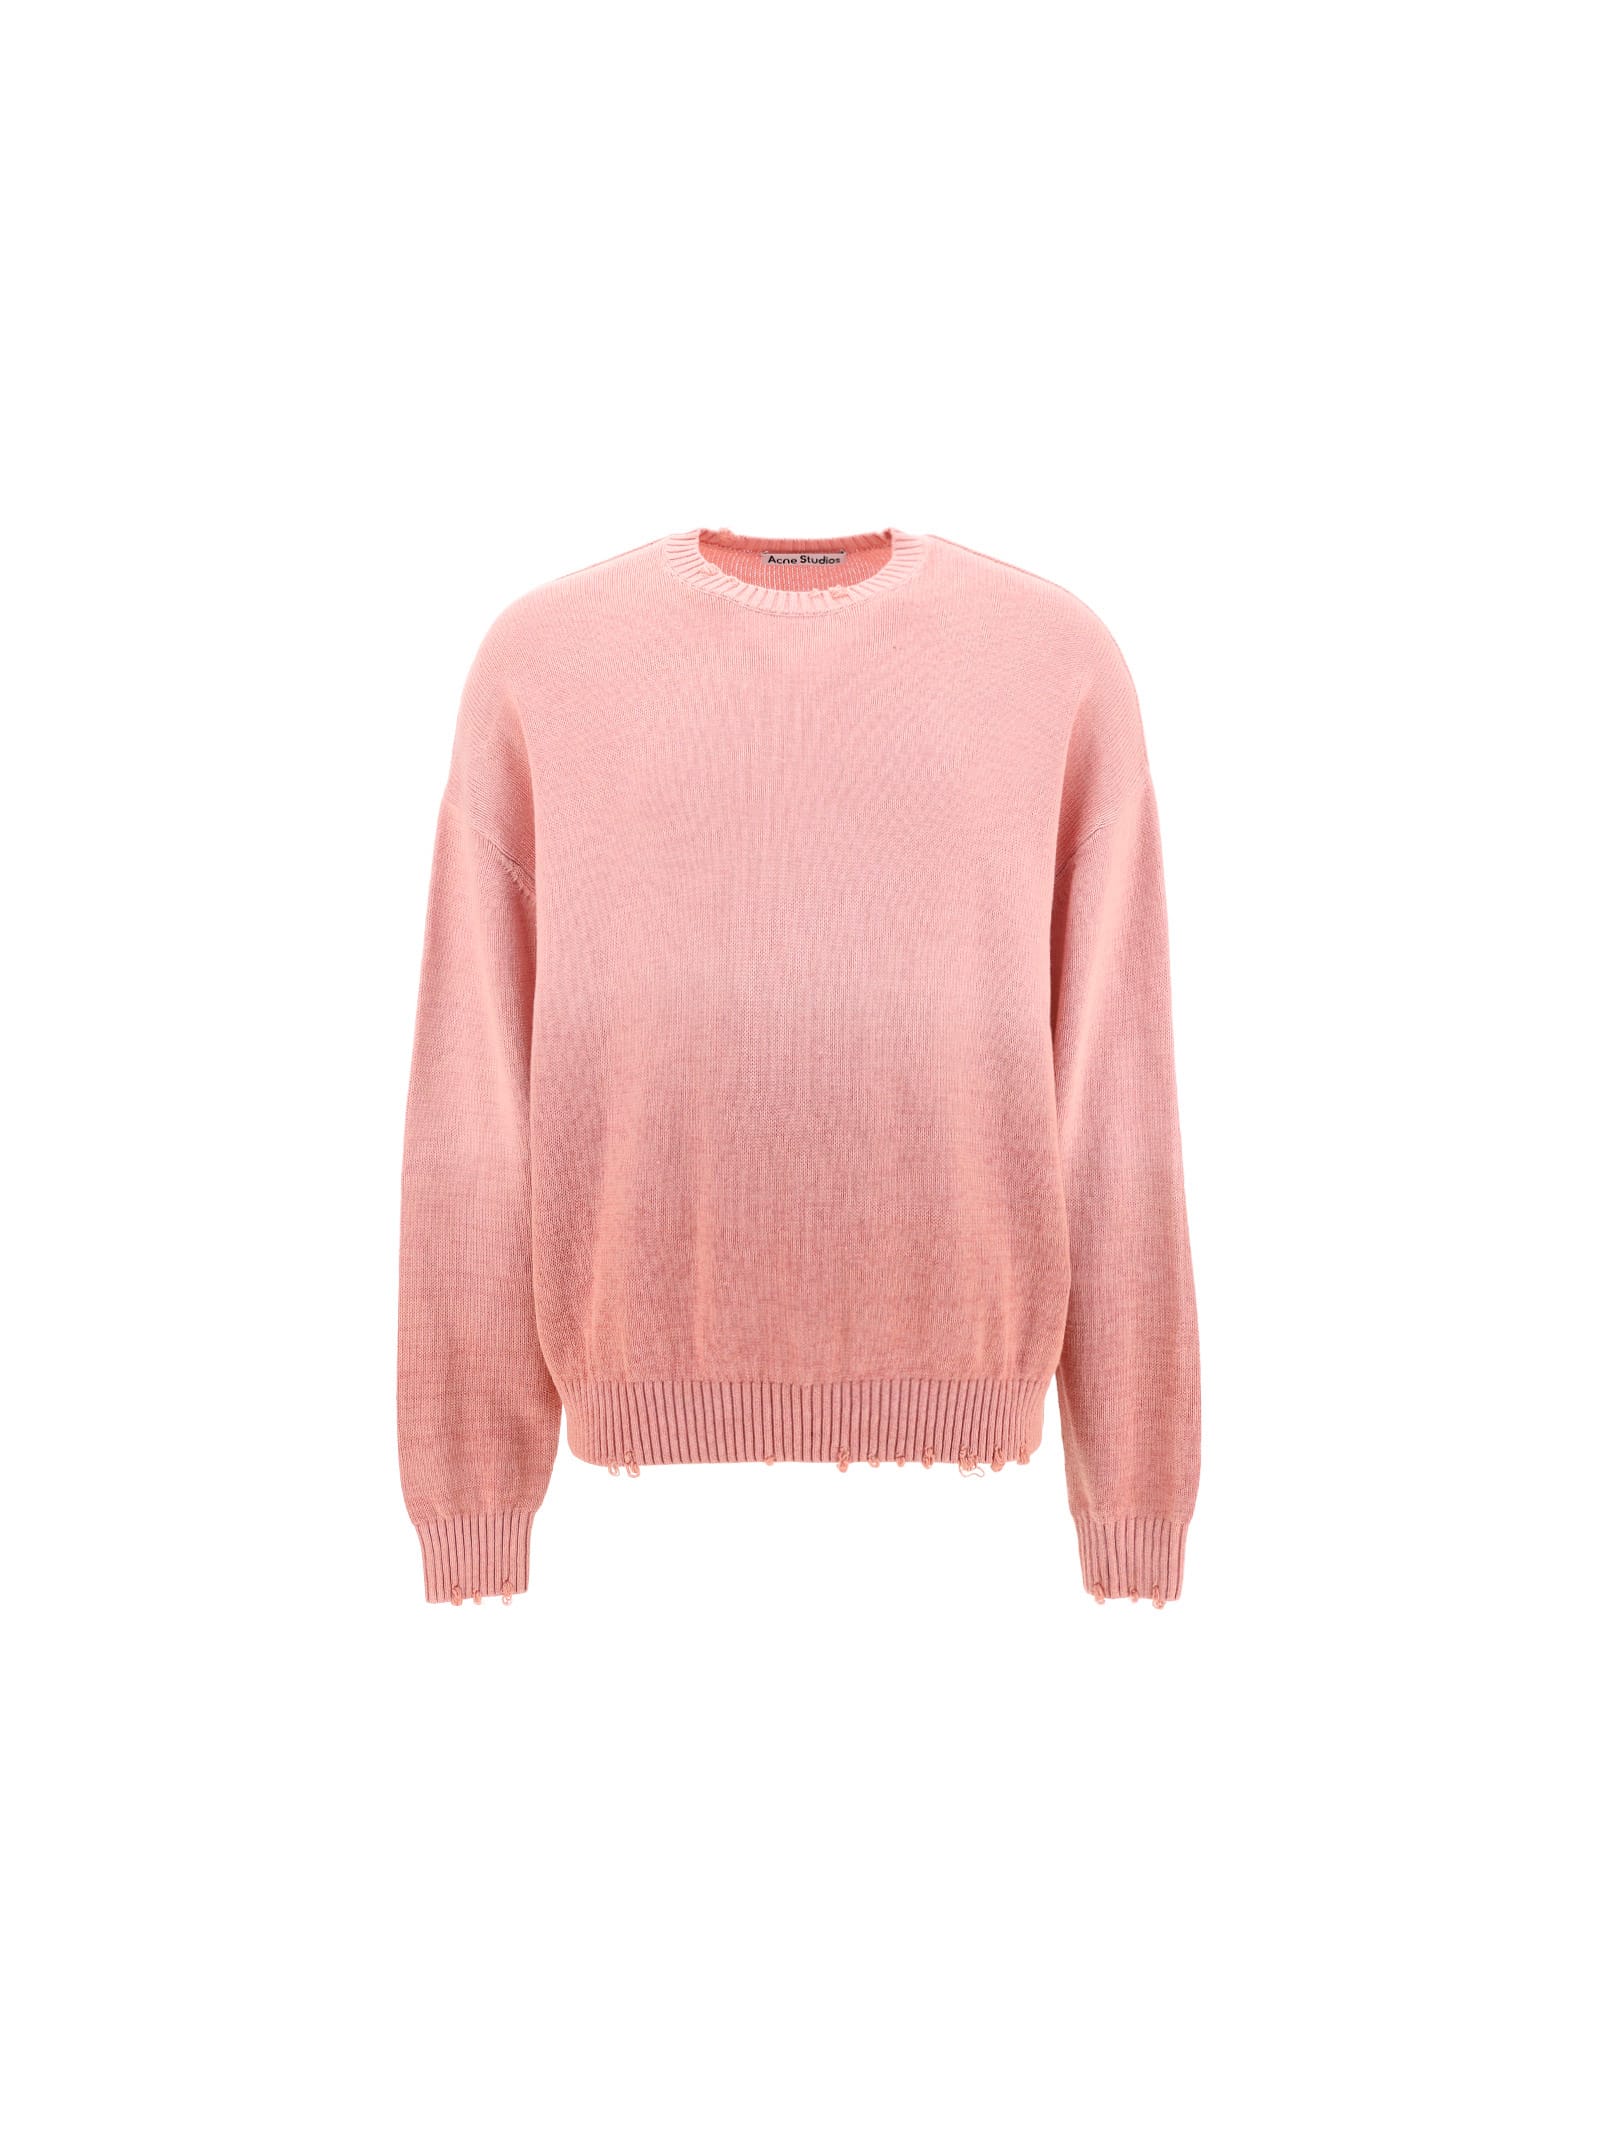 Acne Studios Sweater In Blossom Pink | ModeSens